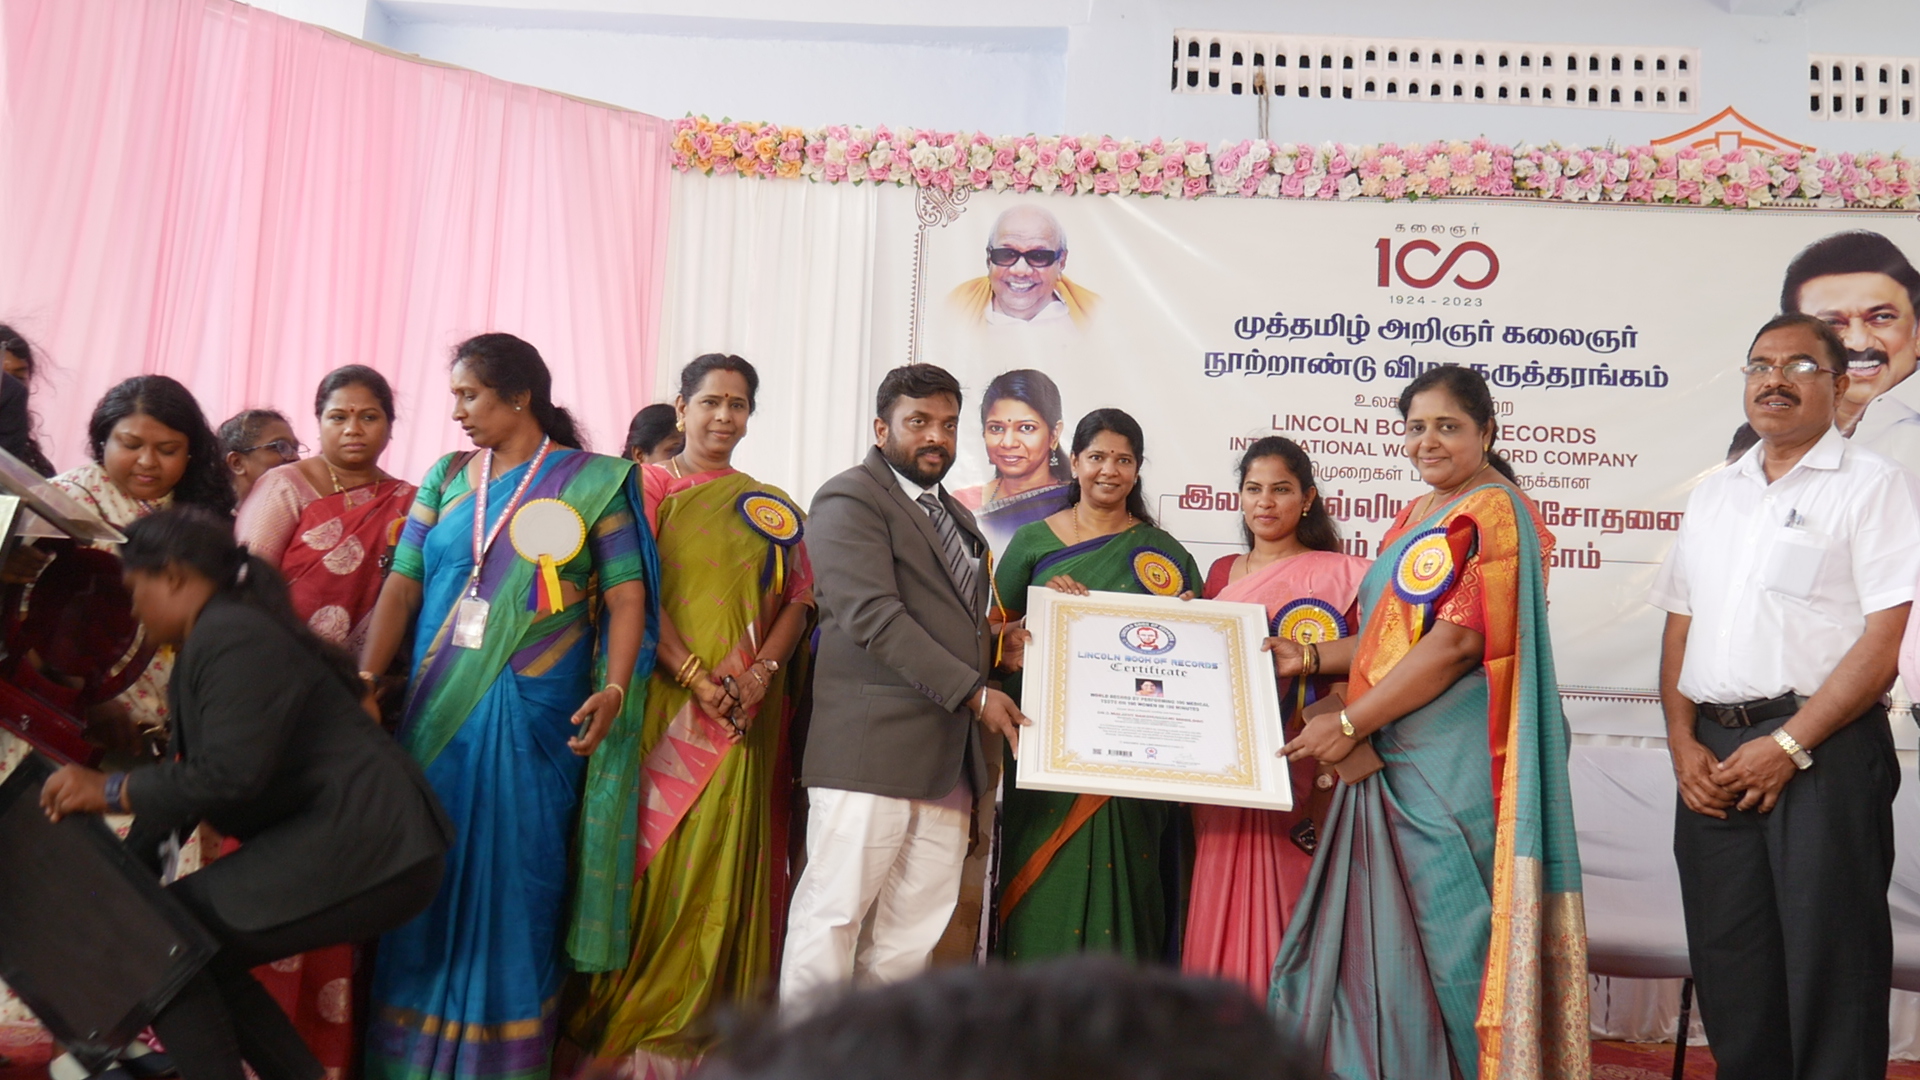 World Record by performing 100 medical  tests on 100 women in 100 minutes